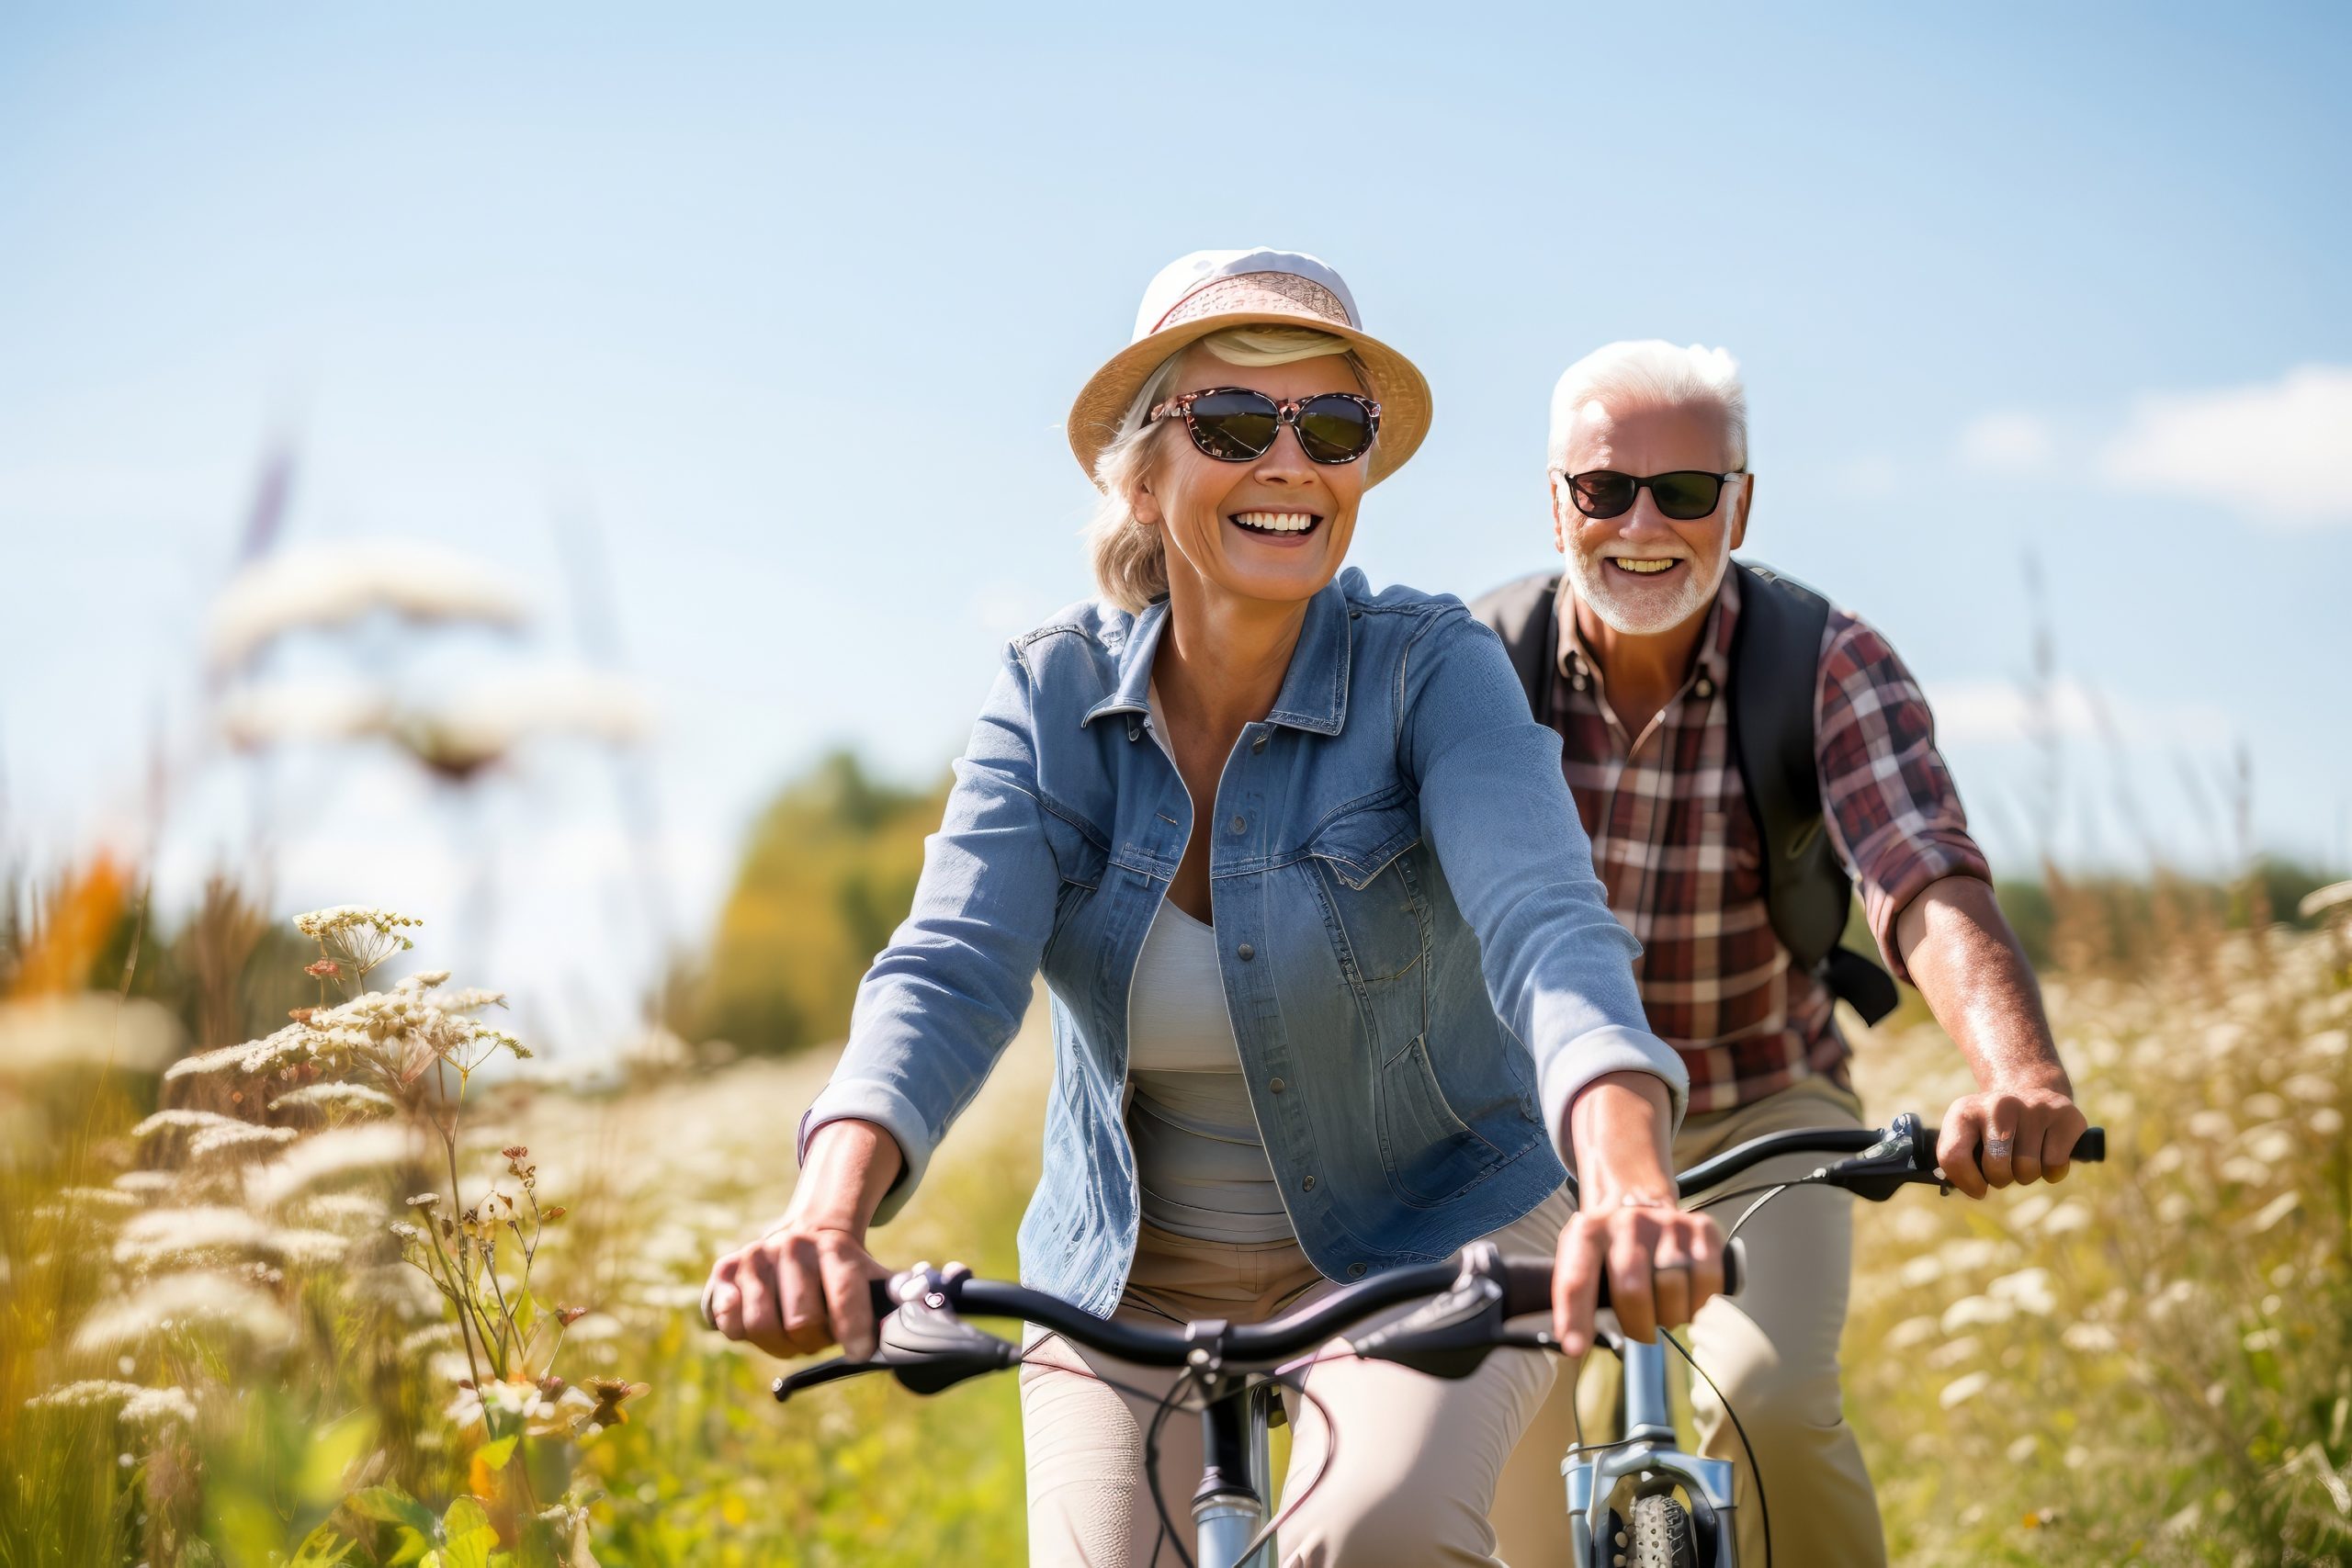 Is Bike Riding Still an Option for Those Over 60?